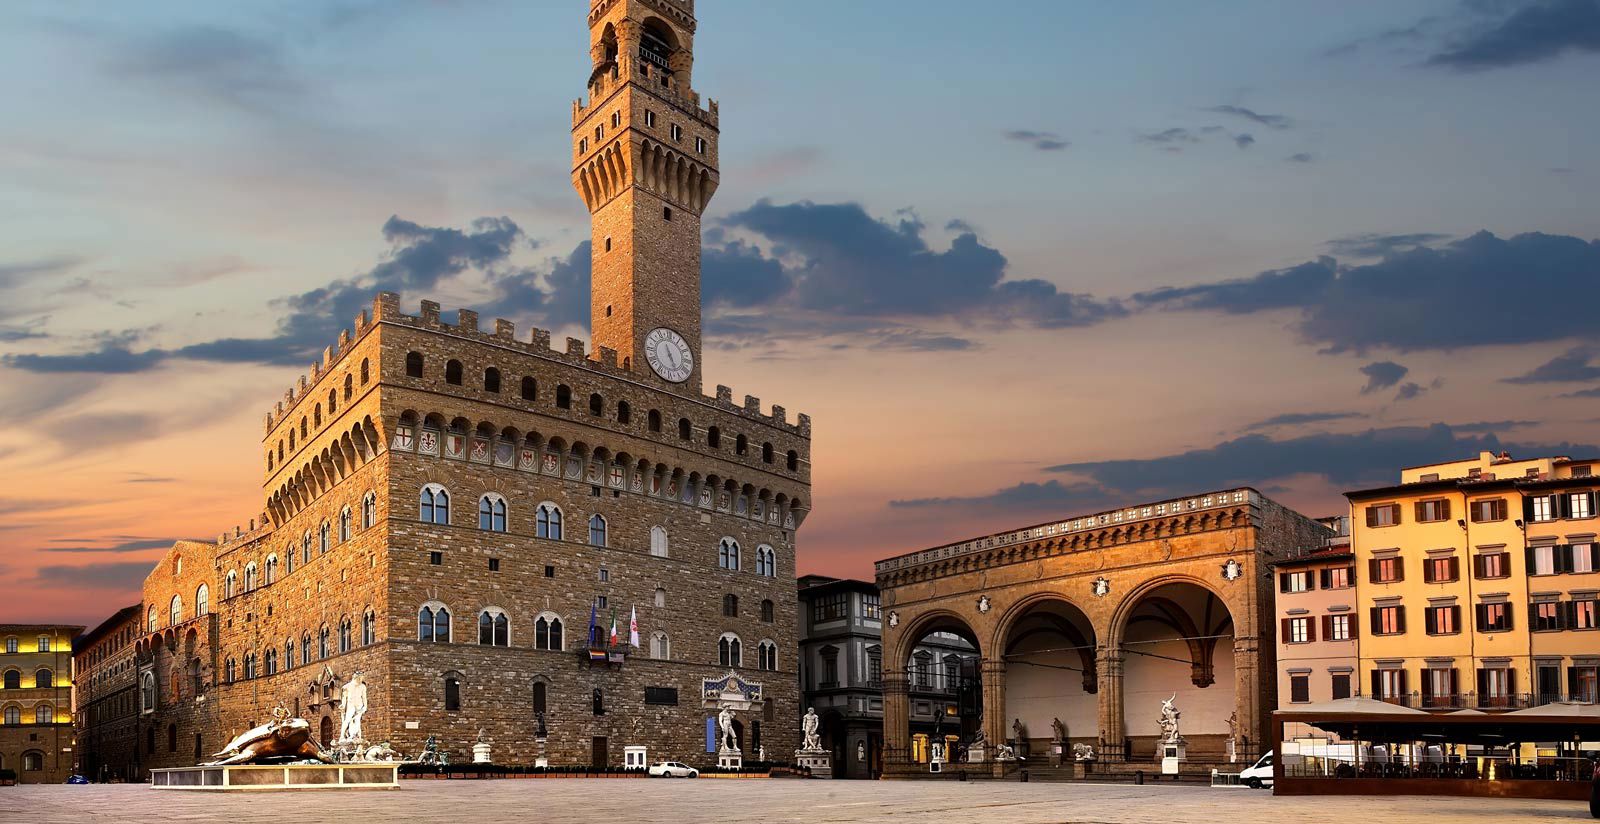 Relais Uffizi: Exclusive Lounge Bar in the Heart of Florence 5